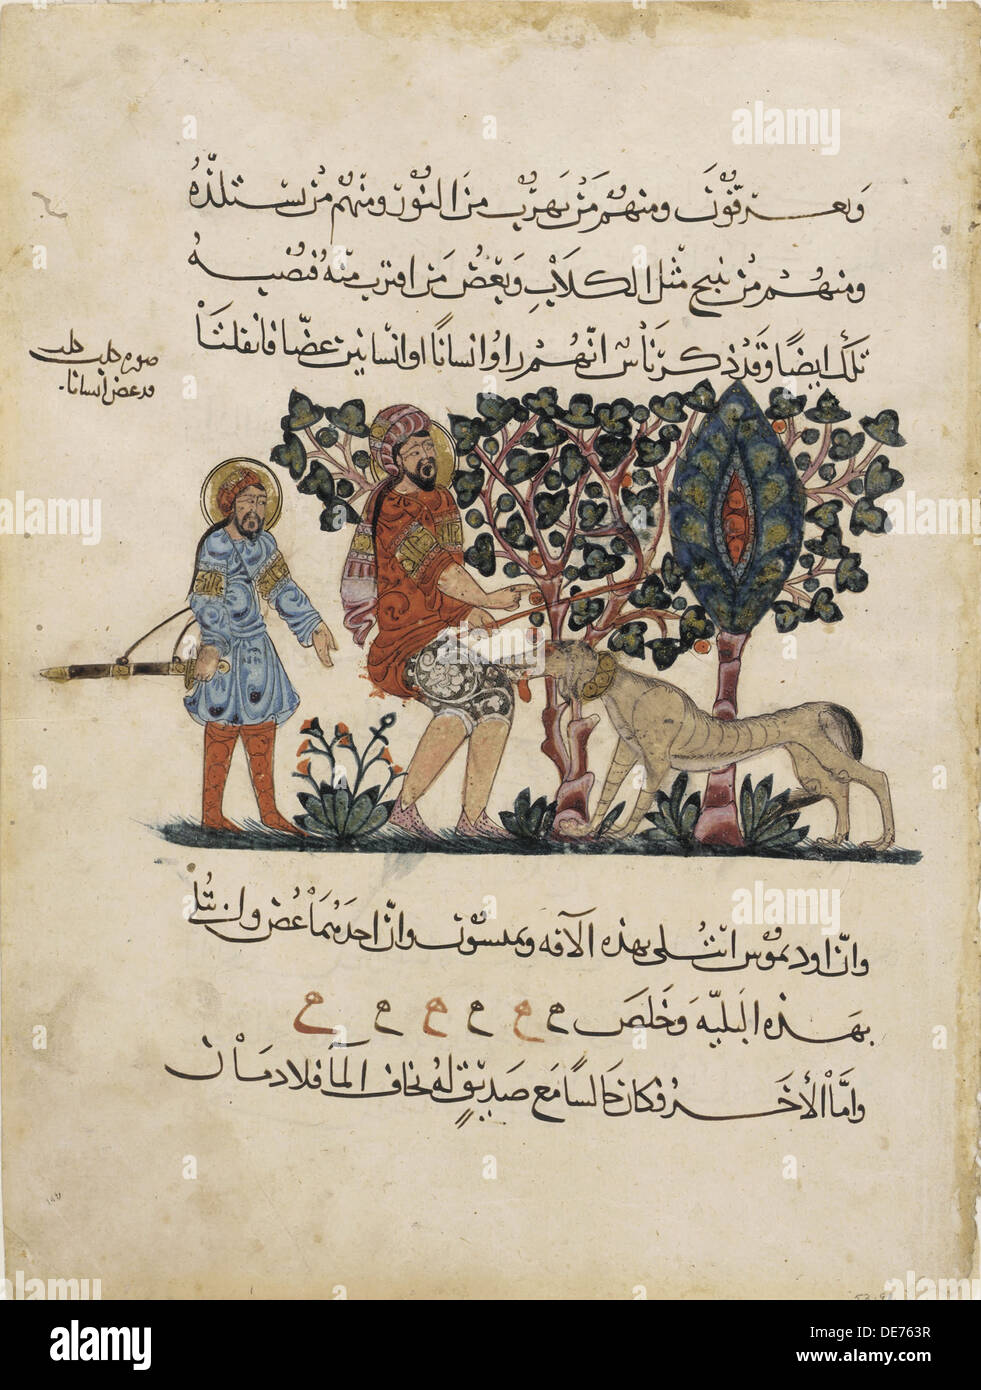 Greek physician Erasistratos with an Assistant (Folio from an Arabic translation of the Materia Medica by Dioscorides), 1224. Artist: Central Asian Ar Stock Photo